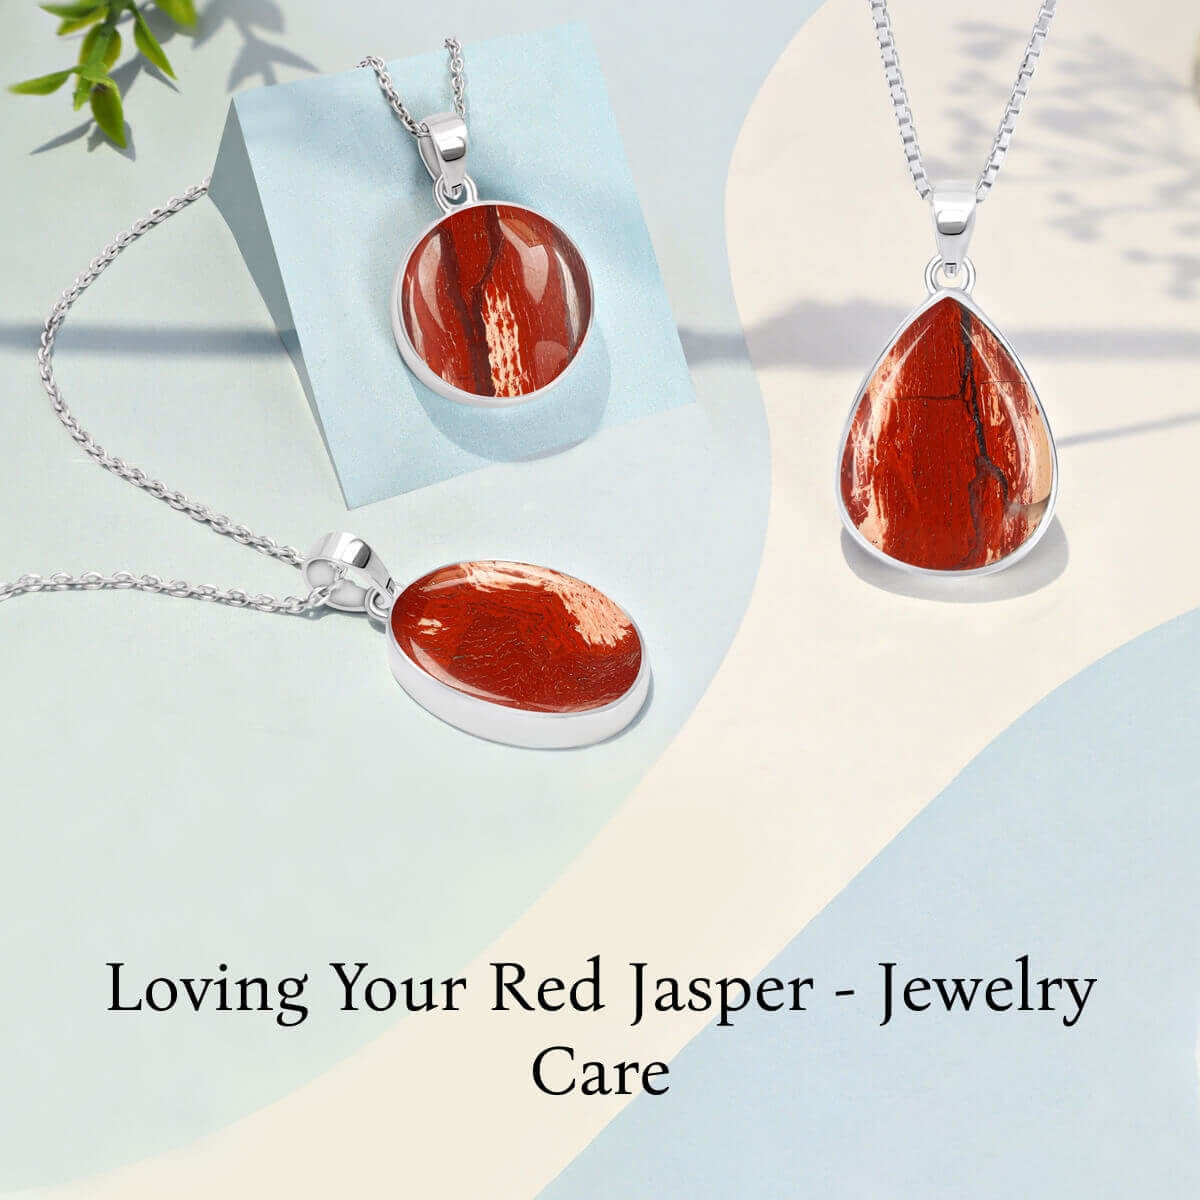 How to Care & Maintain Your Red Jasper Sterling Silver Jewelry